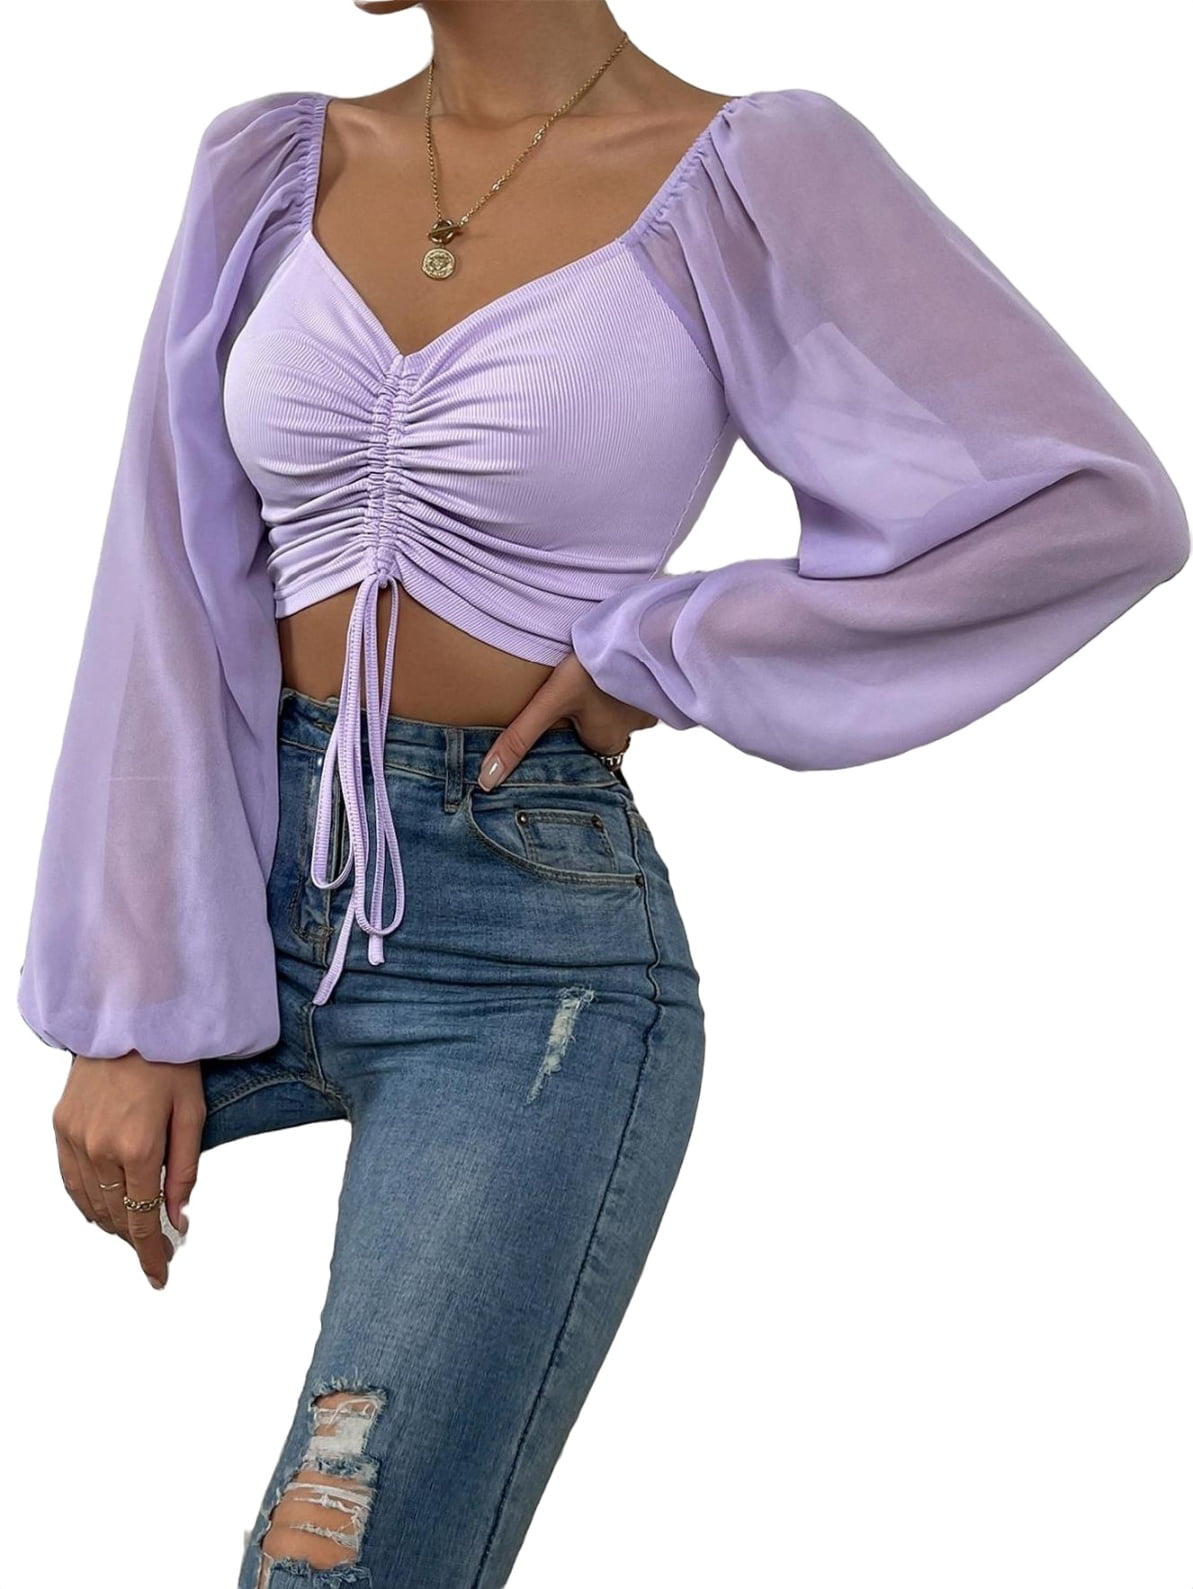 Hyades Braided Long Sleeve Top, Lilac